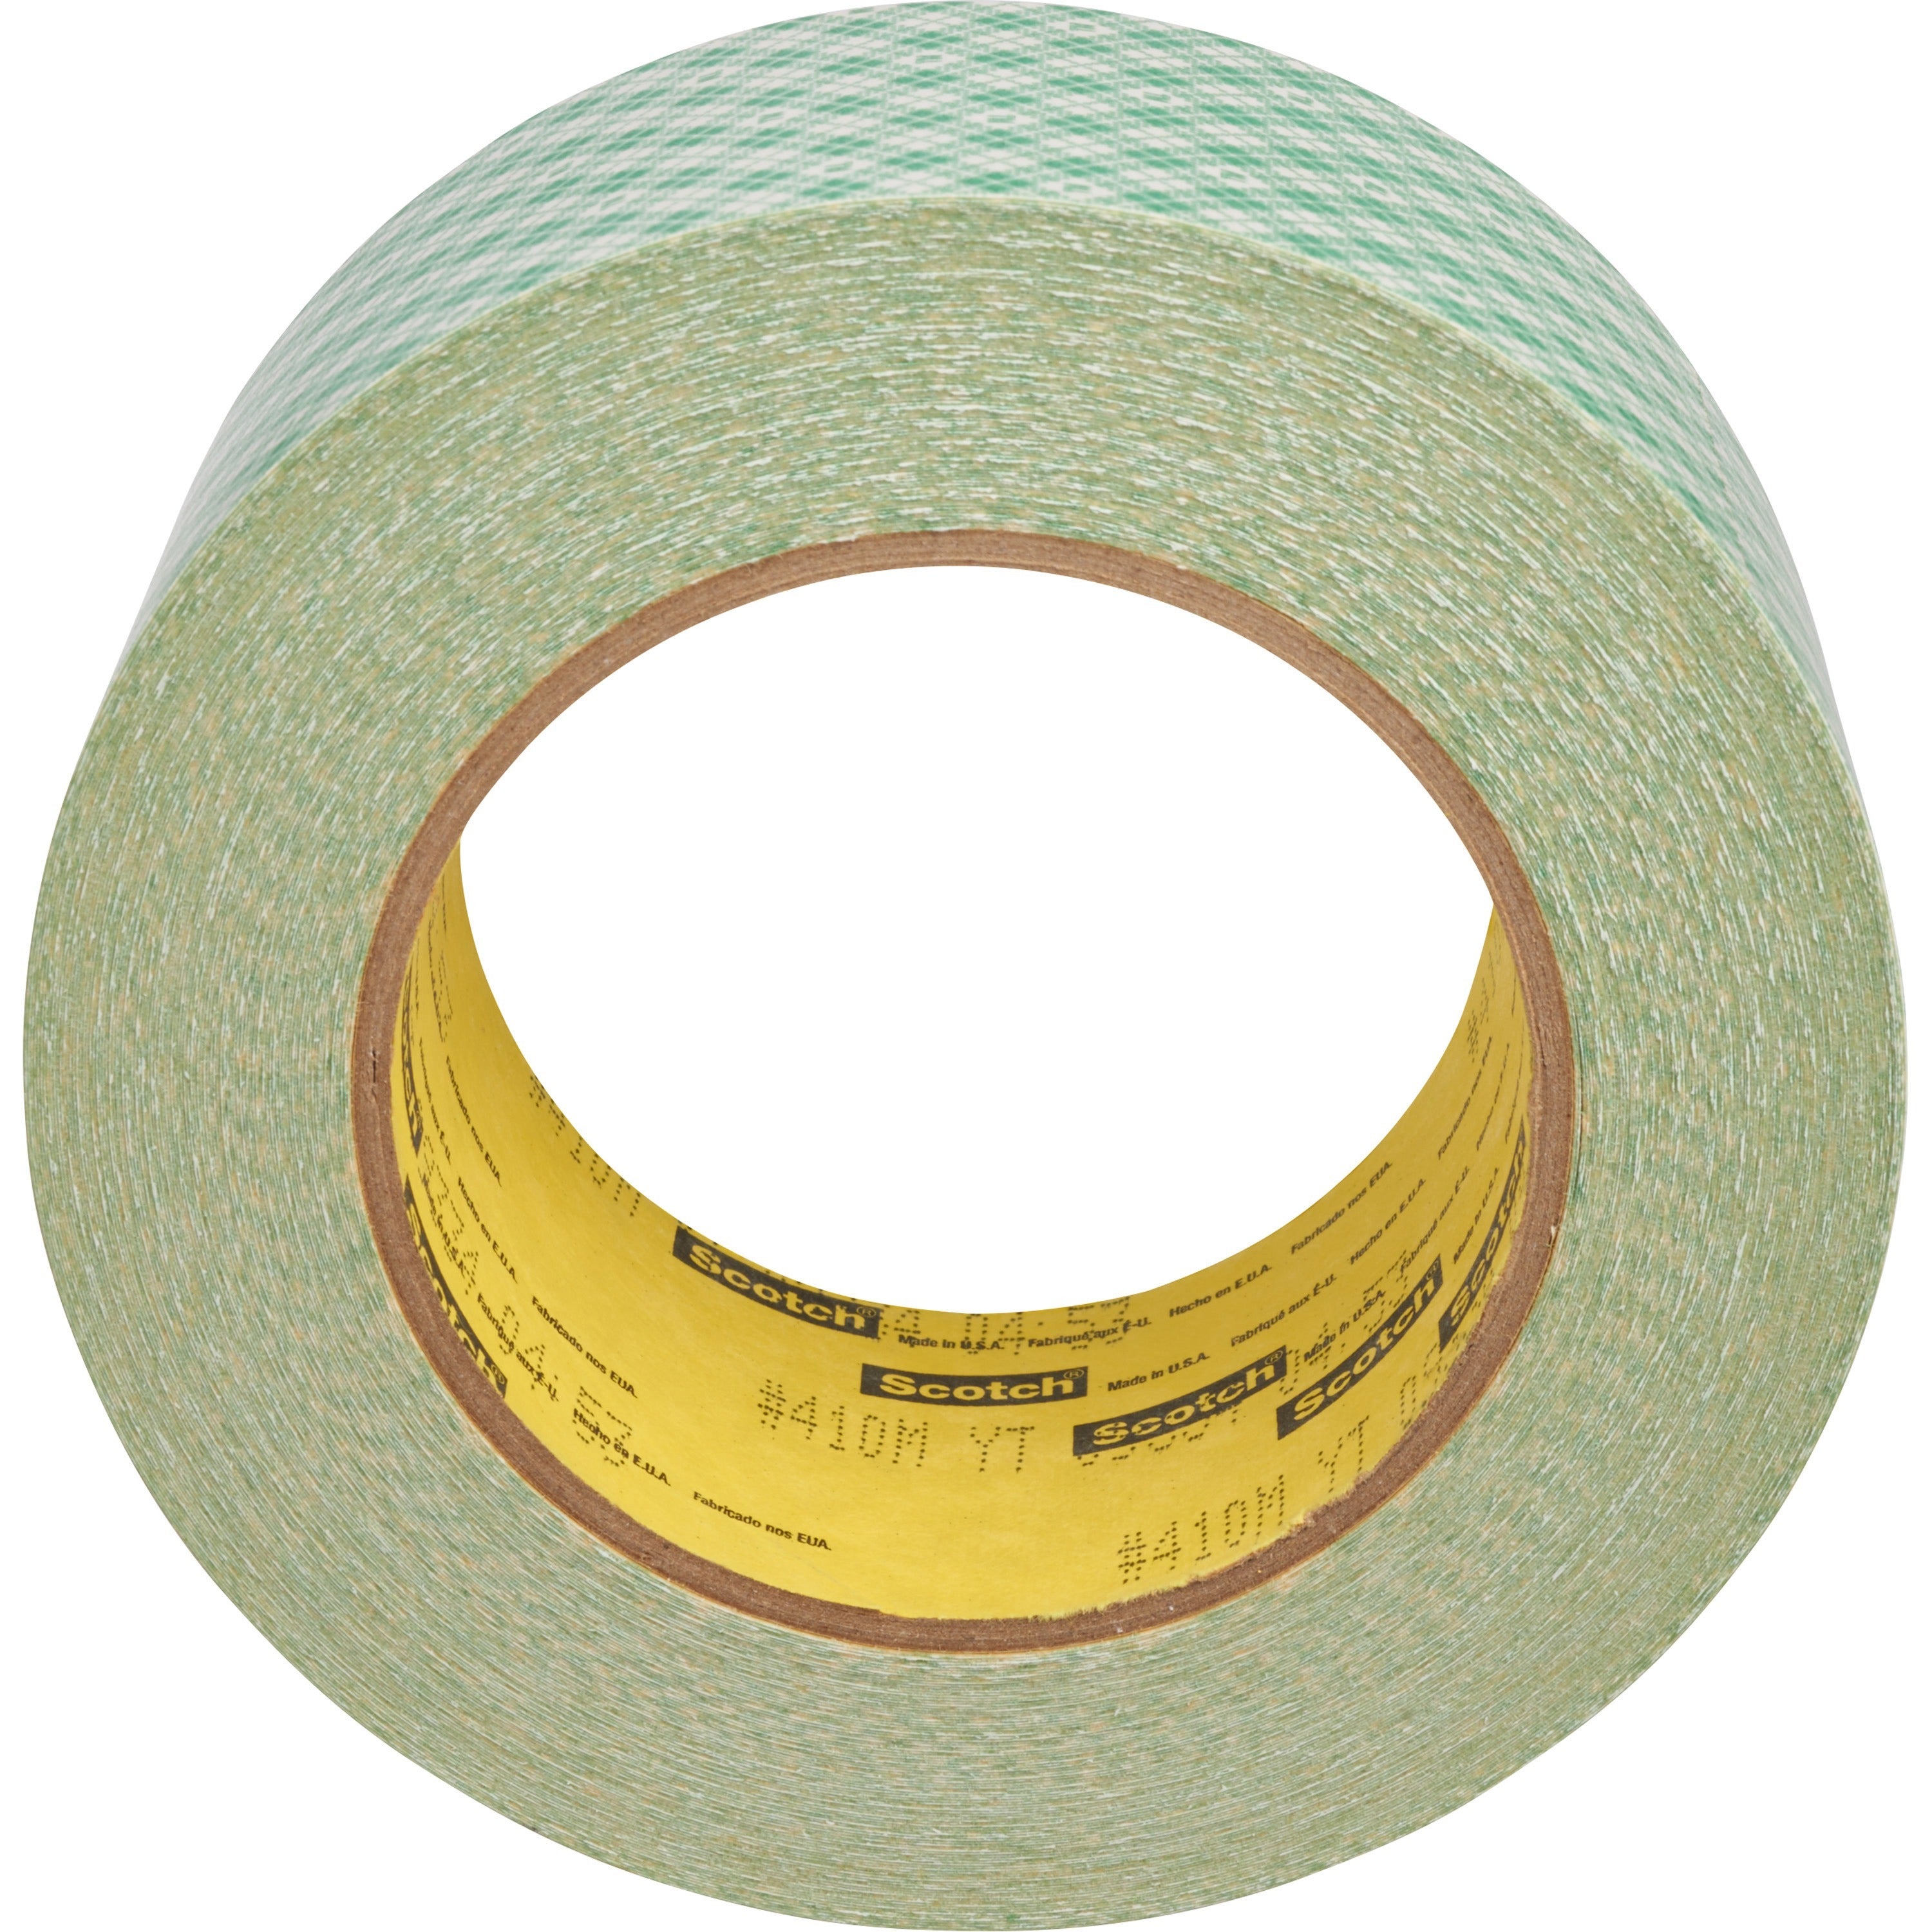 Scotch Double-Coated Paper Tape - 36 yd Length x 2" Width - 6 mil Thickness - 3" Core - Kraft - Rubber Backing - Chemical Resistant, Temperature Resistant, Moisture Resistant, UV Resistant - For General Purpose, Multipurpose - 1 / Roll - Natural - 